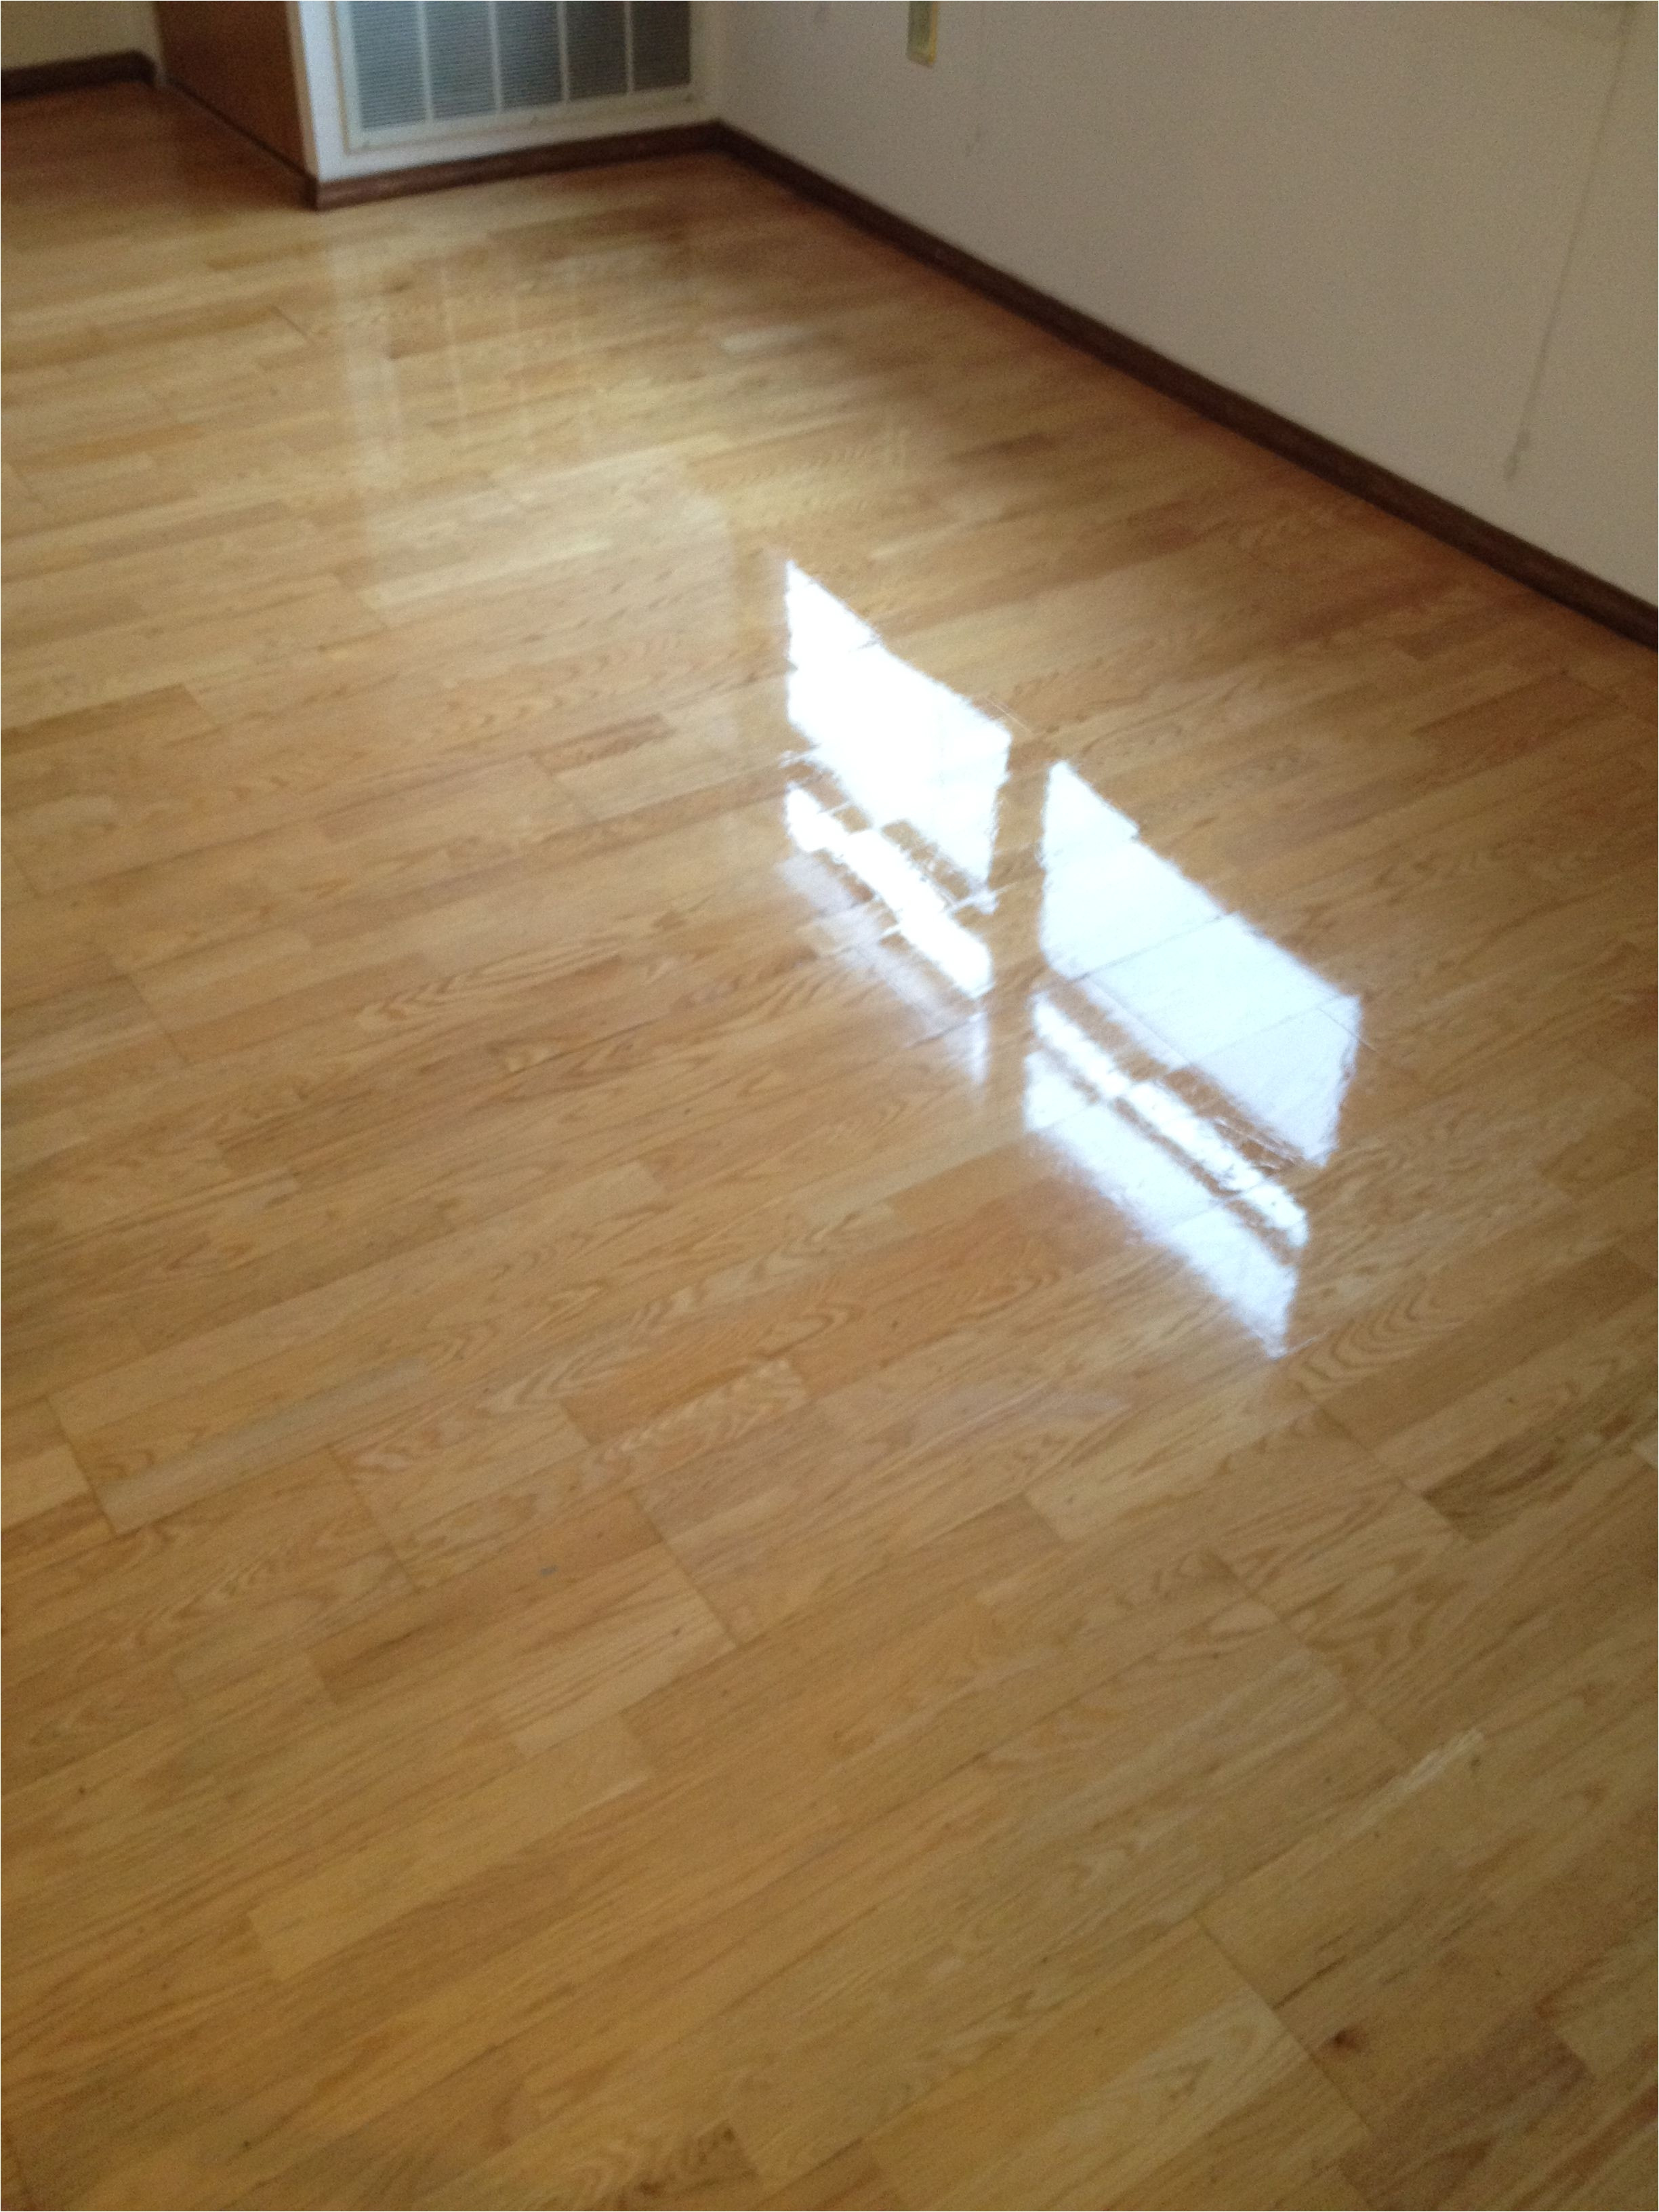 24 Lovely Hardwood Floor with Tile 2024 free download hardwood floor with tile of homemade laminate wood floor polish laminate flooring bamboo floor pertaining to homemade laminate wood floor polish laminate flooring bamboo floor cleaning produ